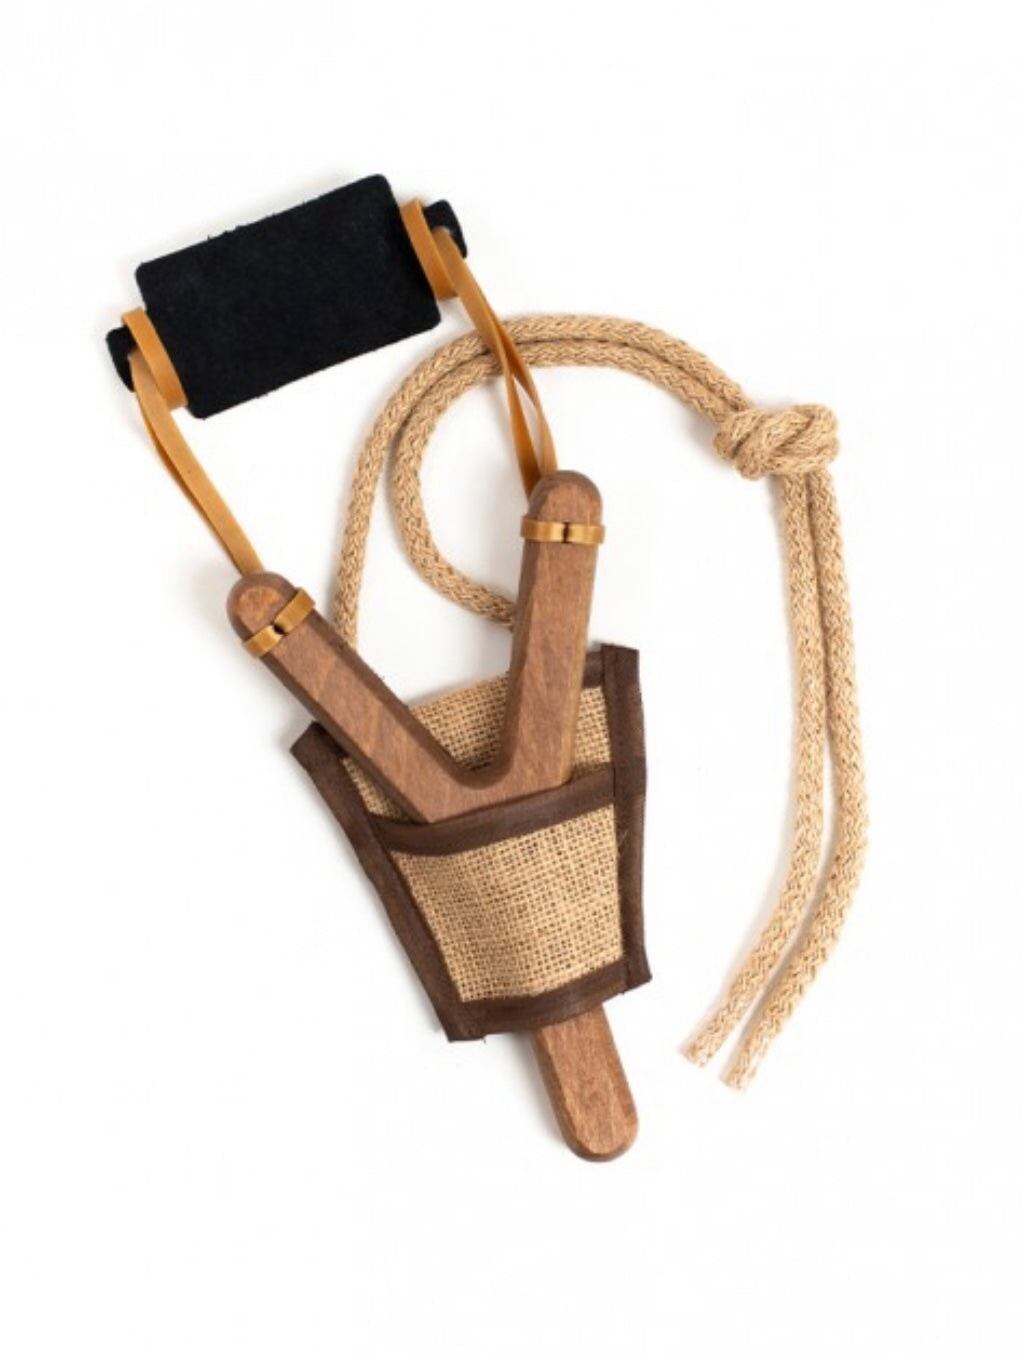 Slingshot girdle, jute, Wooden Handcrafted by Kalid Medieval Classic Toy - Alder & Alouette